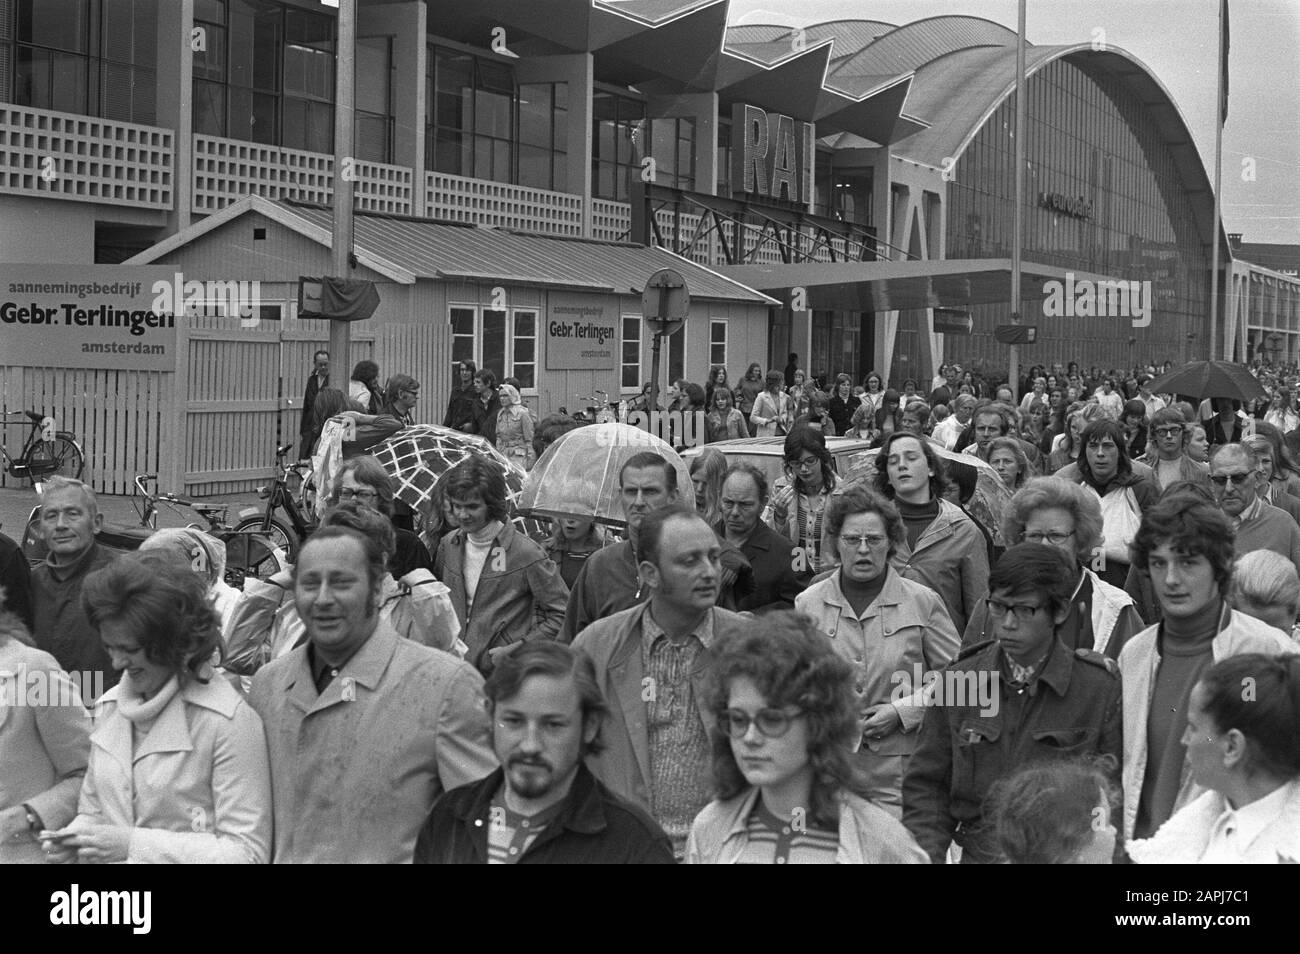 Start of the Evening Four Days 1972 at the RAI in Amsterdam Description: Participants of the annual walking event Date: 7 June 1972 Location: Amsterdam, Noord-Holland Keywords: sports, hiking, hiking Institution name: RAI Stock Photo